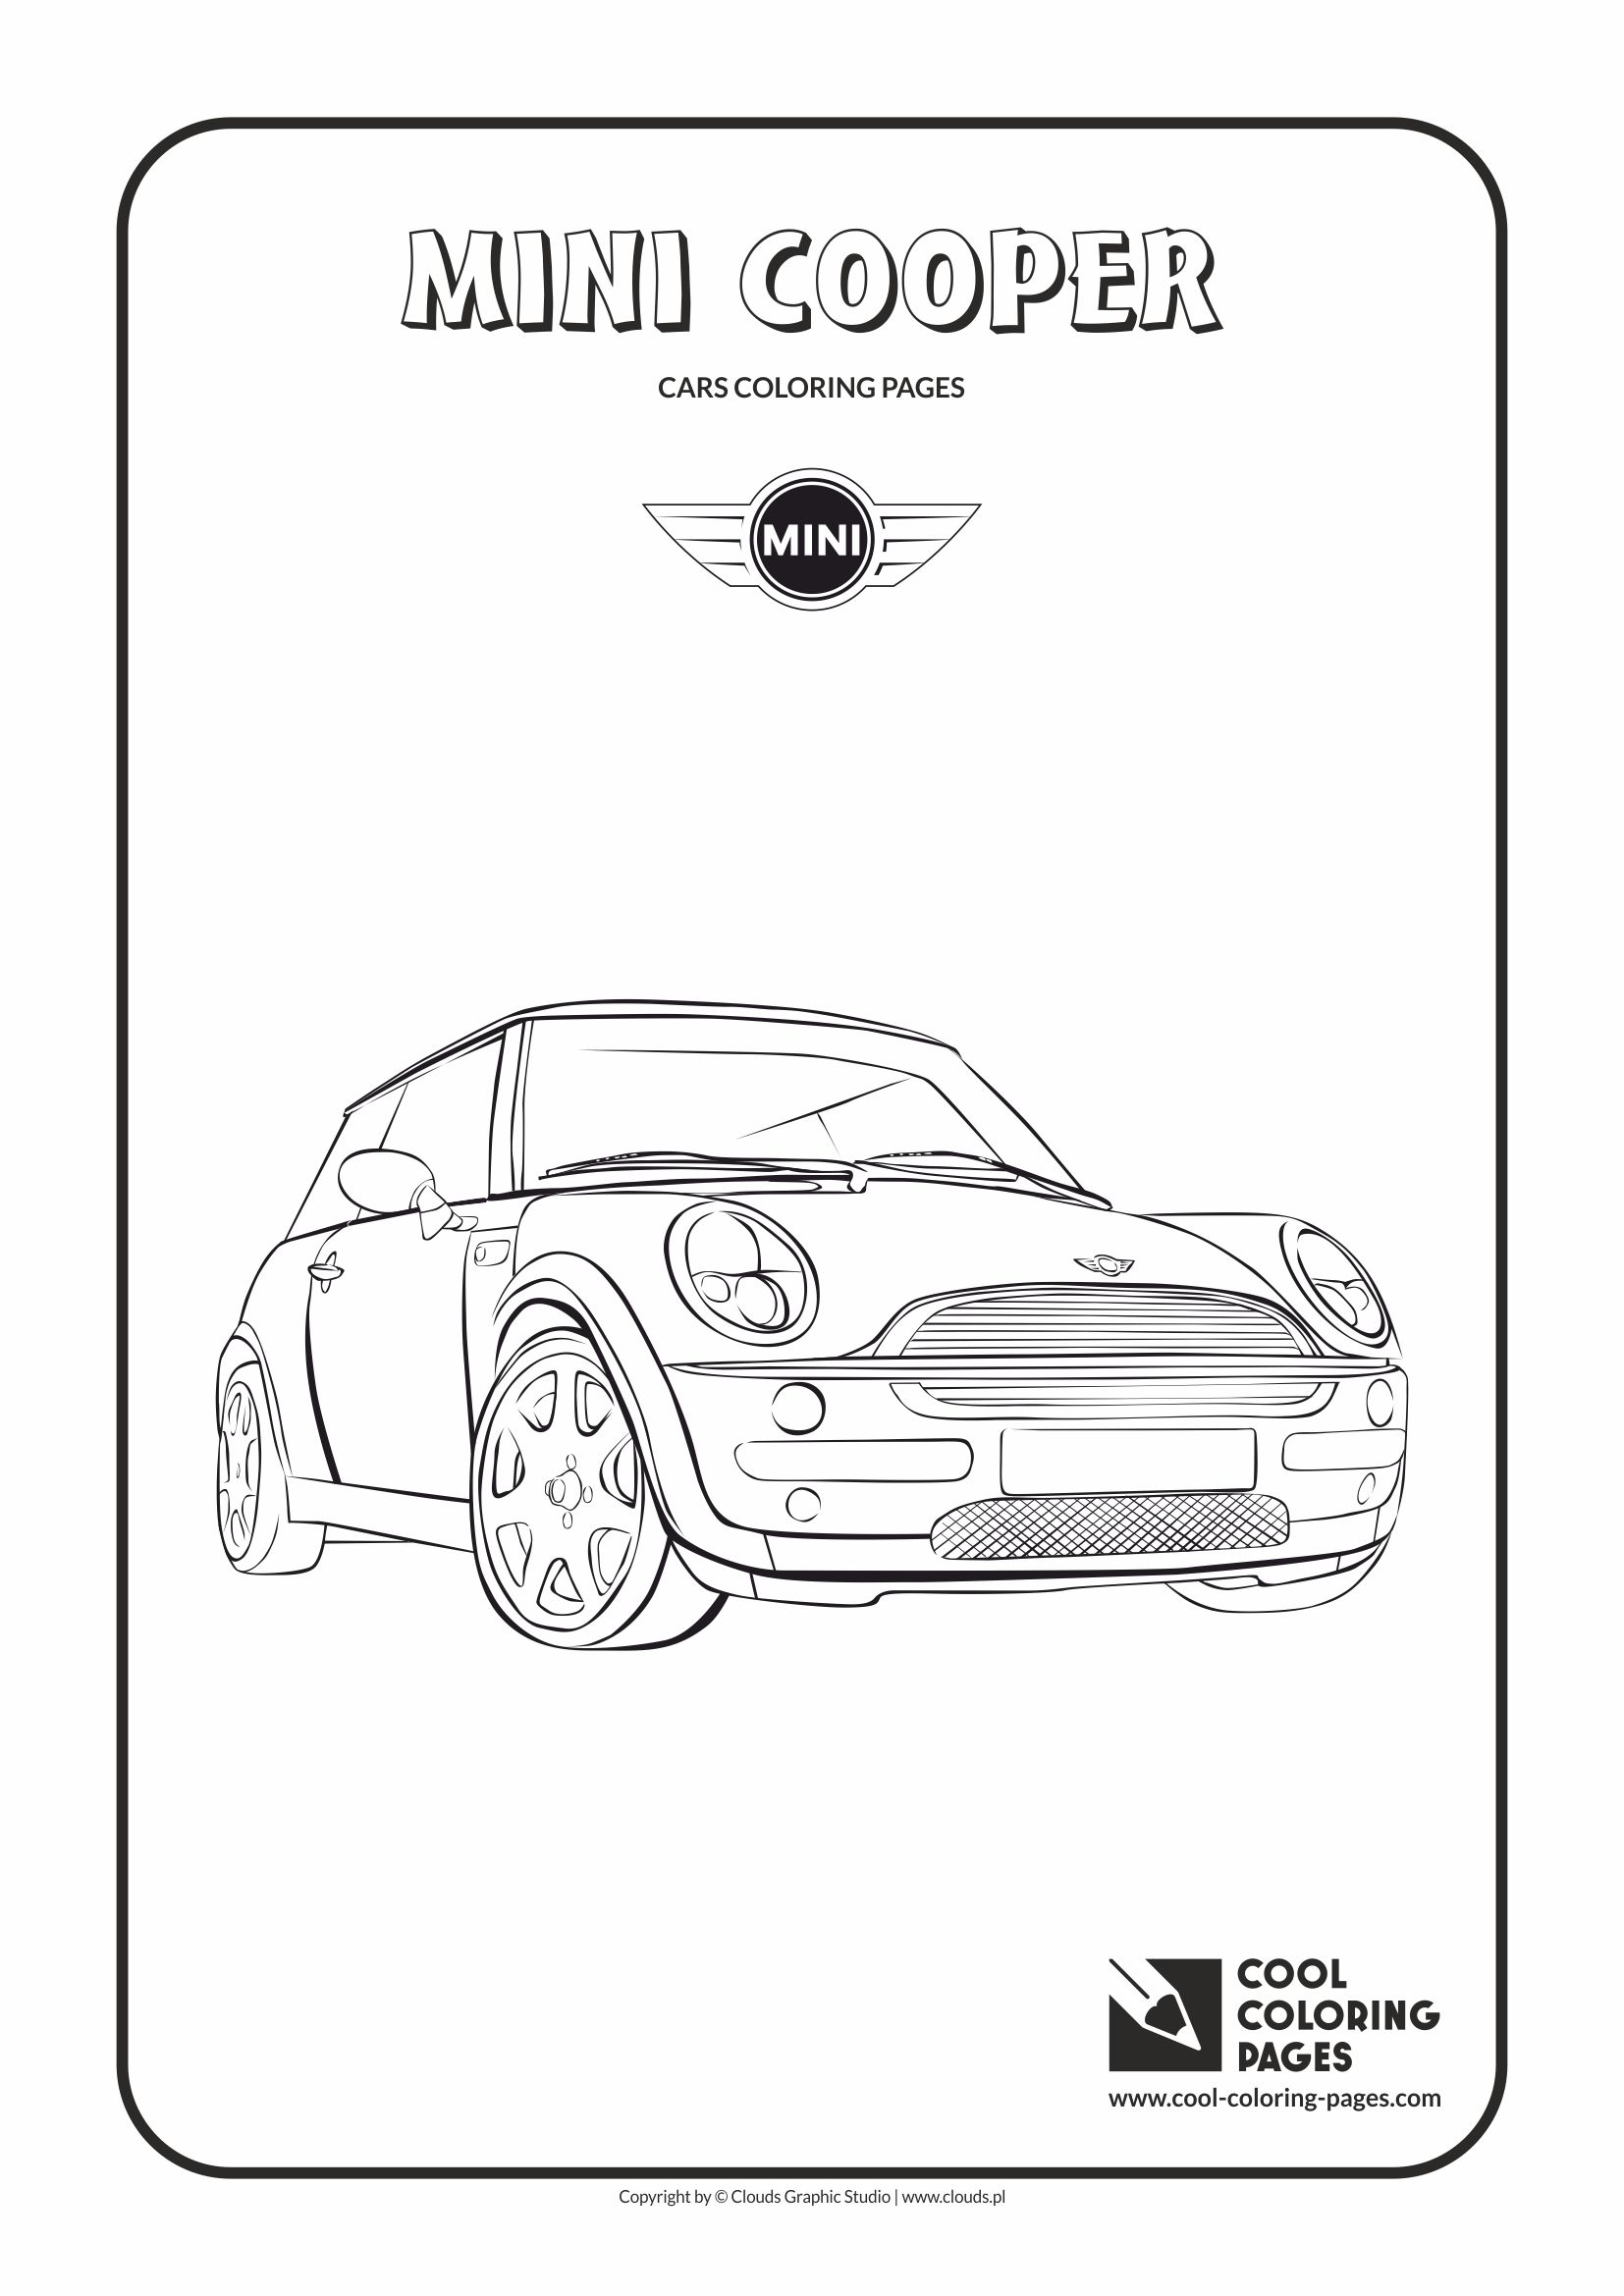 Cool Coloring Pages - Vehicles / Mini Cooper / Coloring page with Mini Cooper